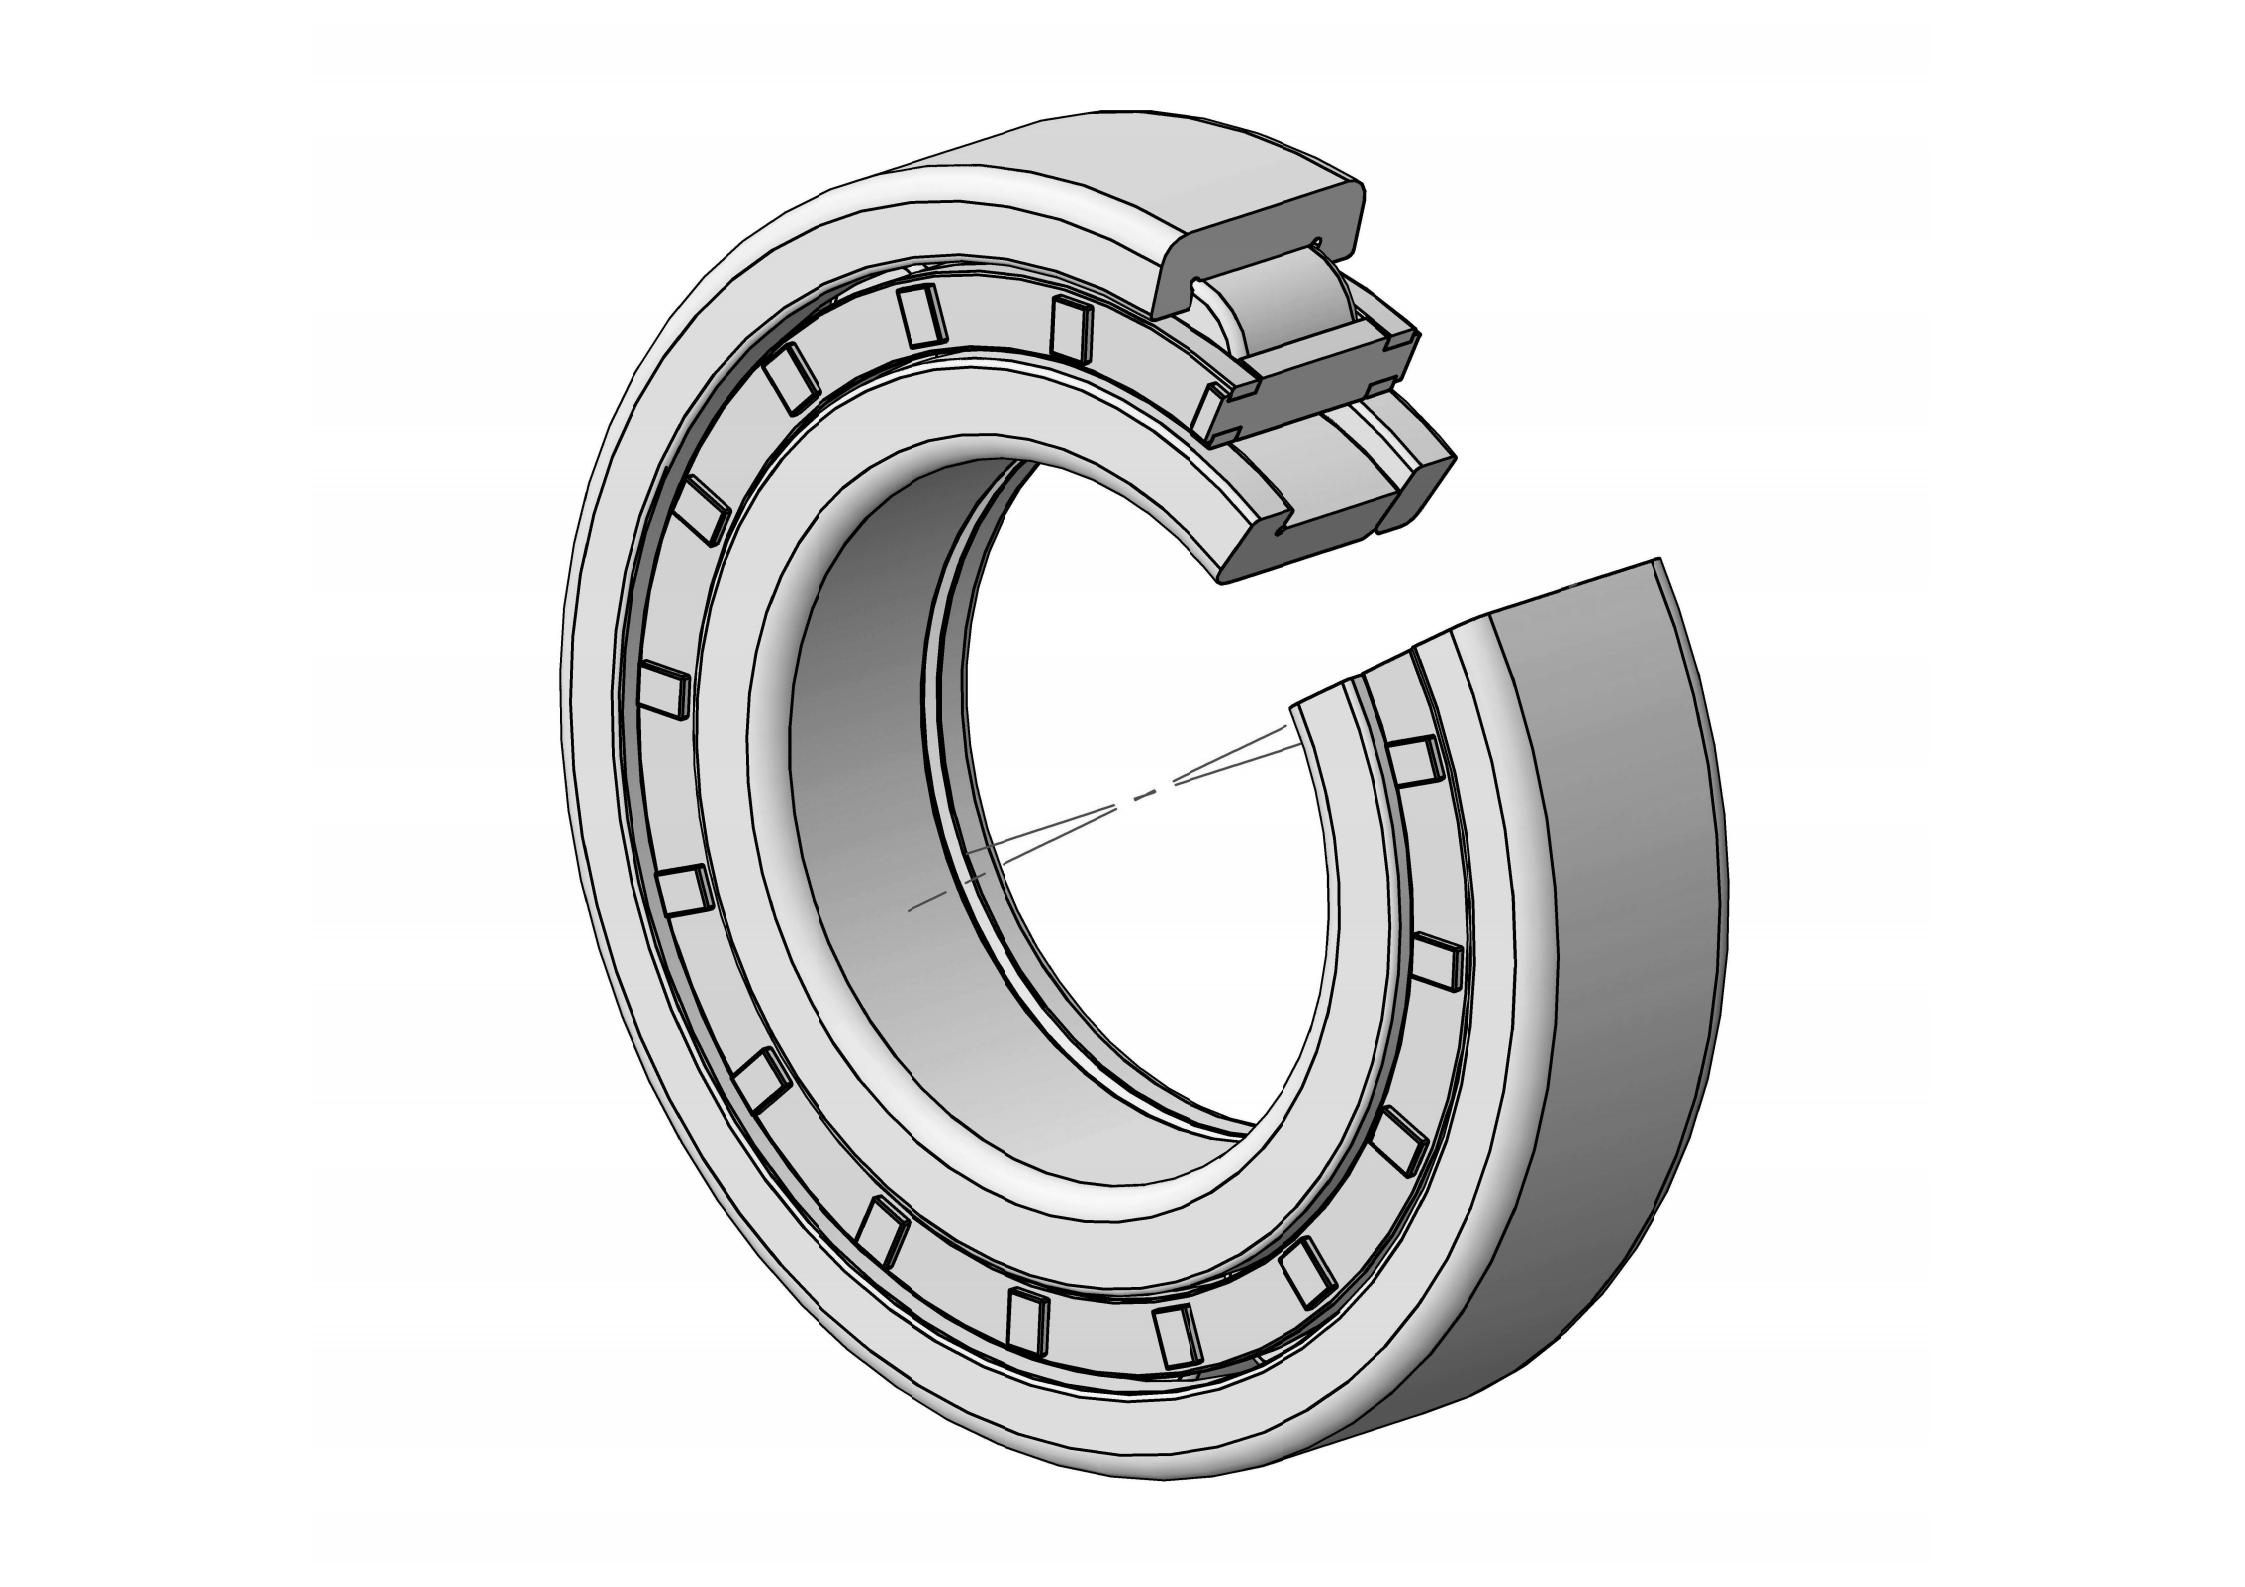 NUP314-E Single Row Cylindrical roller bearing 